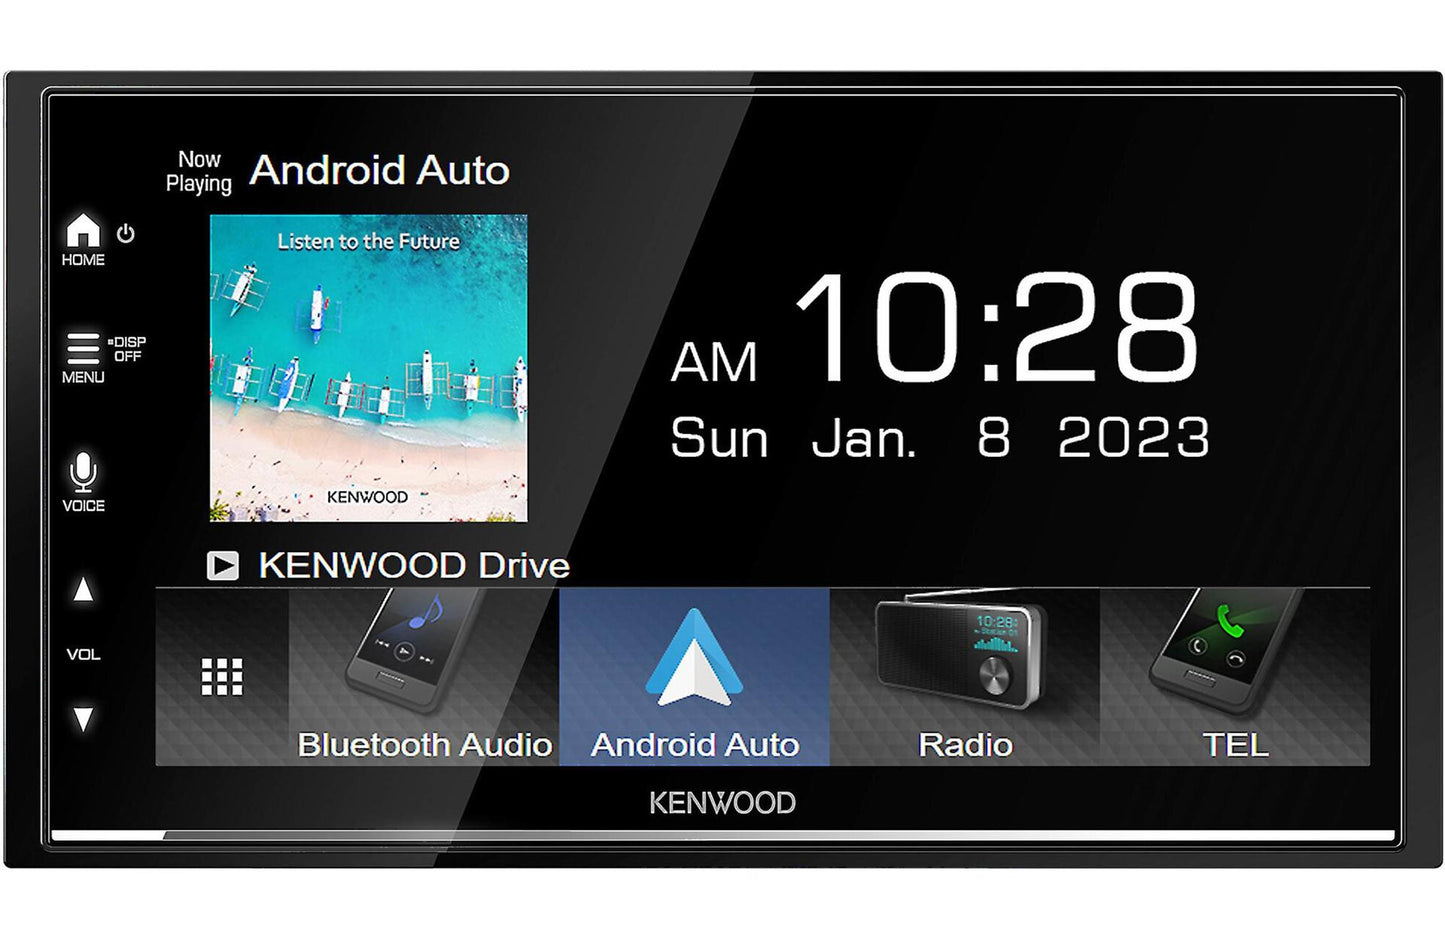 Kenwood DMX8709S 6.8" Screen Receiver, Wireless Android Auto & Apple CarPlay +  iBeam TE-2MPIR Surface License Plate Multi-Mount IR Accessory Back-up Camera + SiriusXM SXV300V1 Tuner